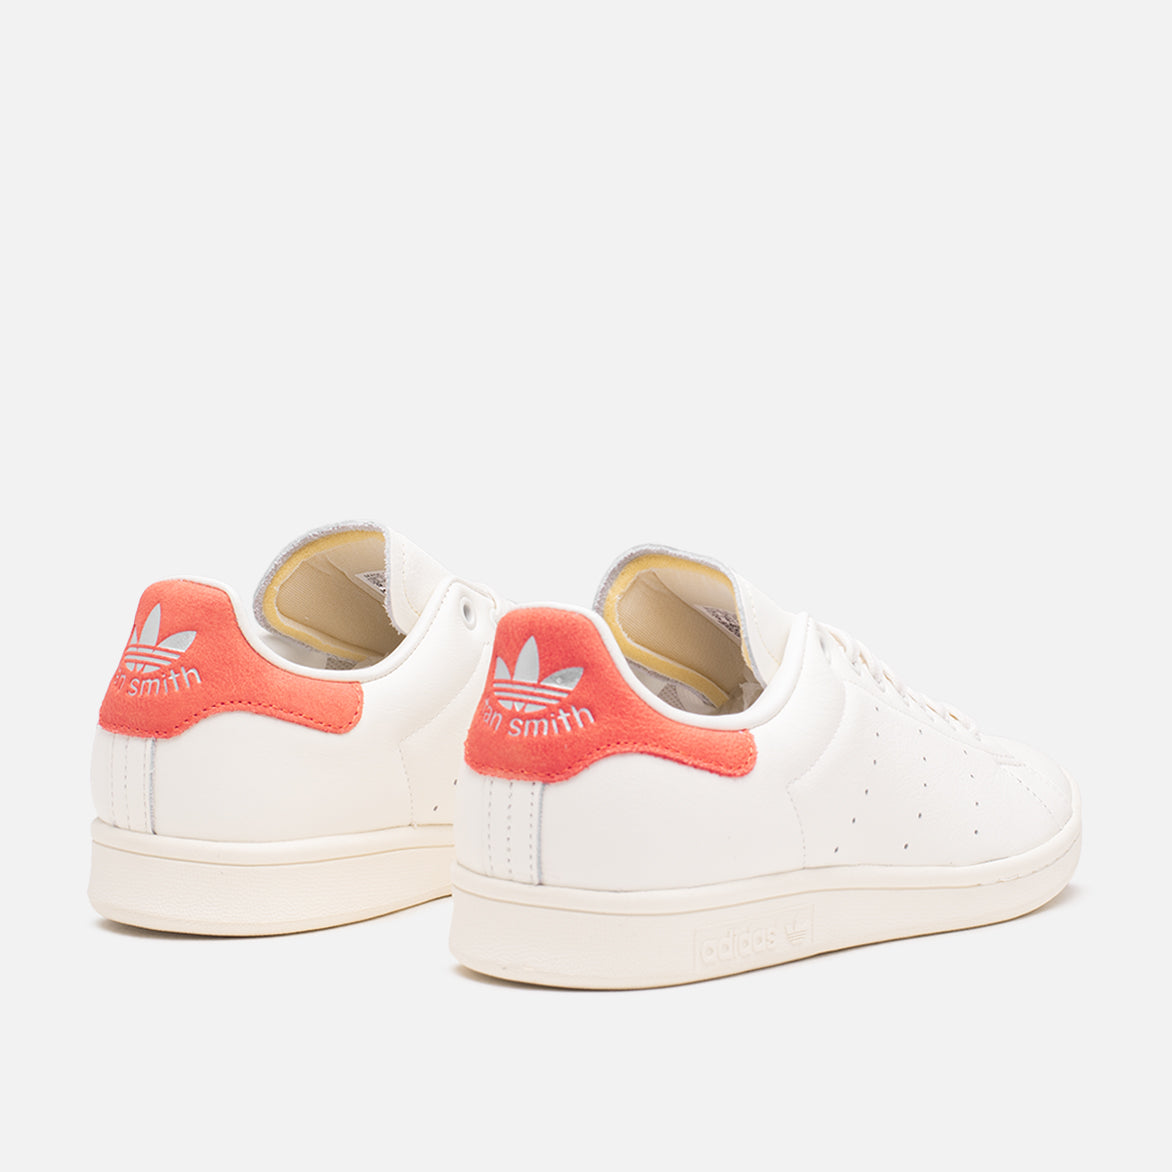 Adidas Stan Smith Shoes - Men's - White / Off White / Preloved Red - 8